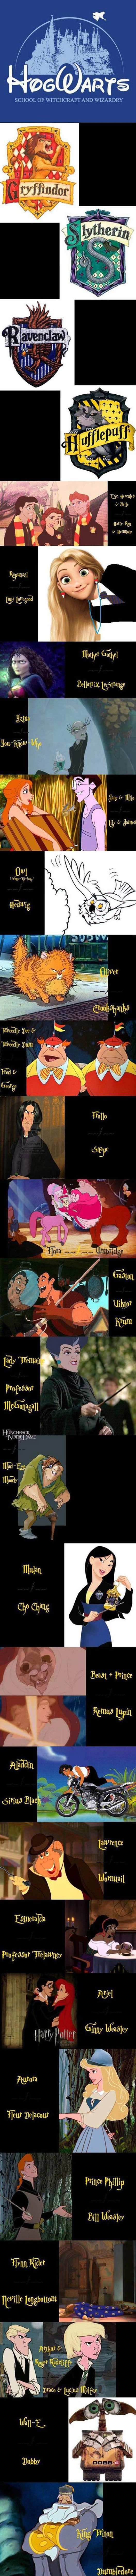 If Harry Potter Was Made By Disney -   Misc